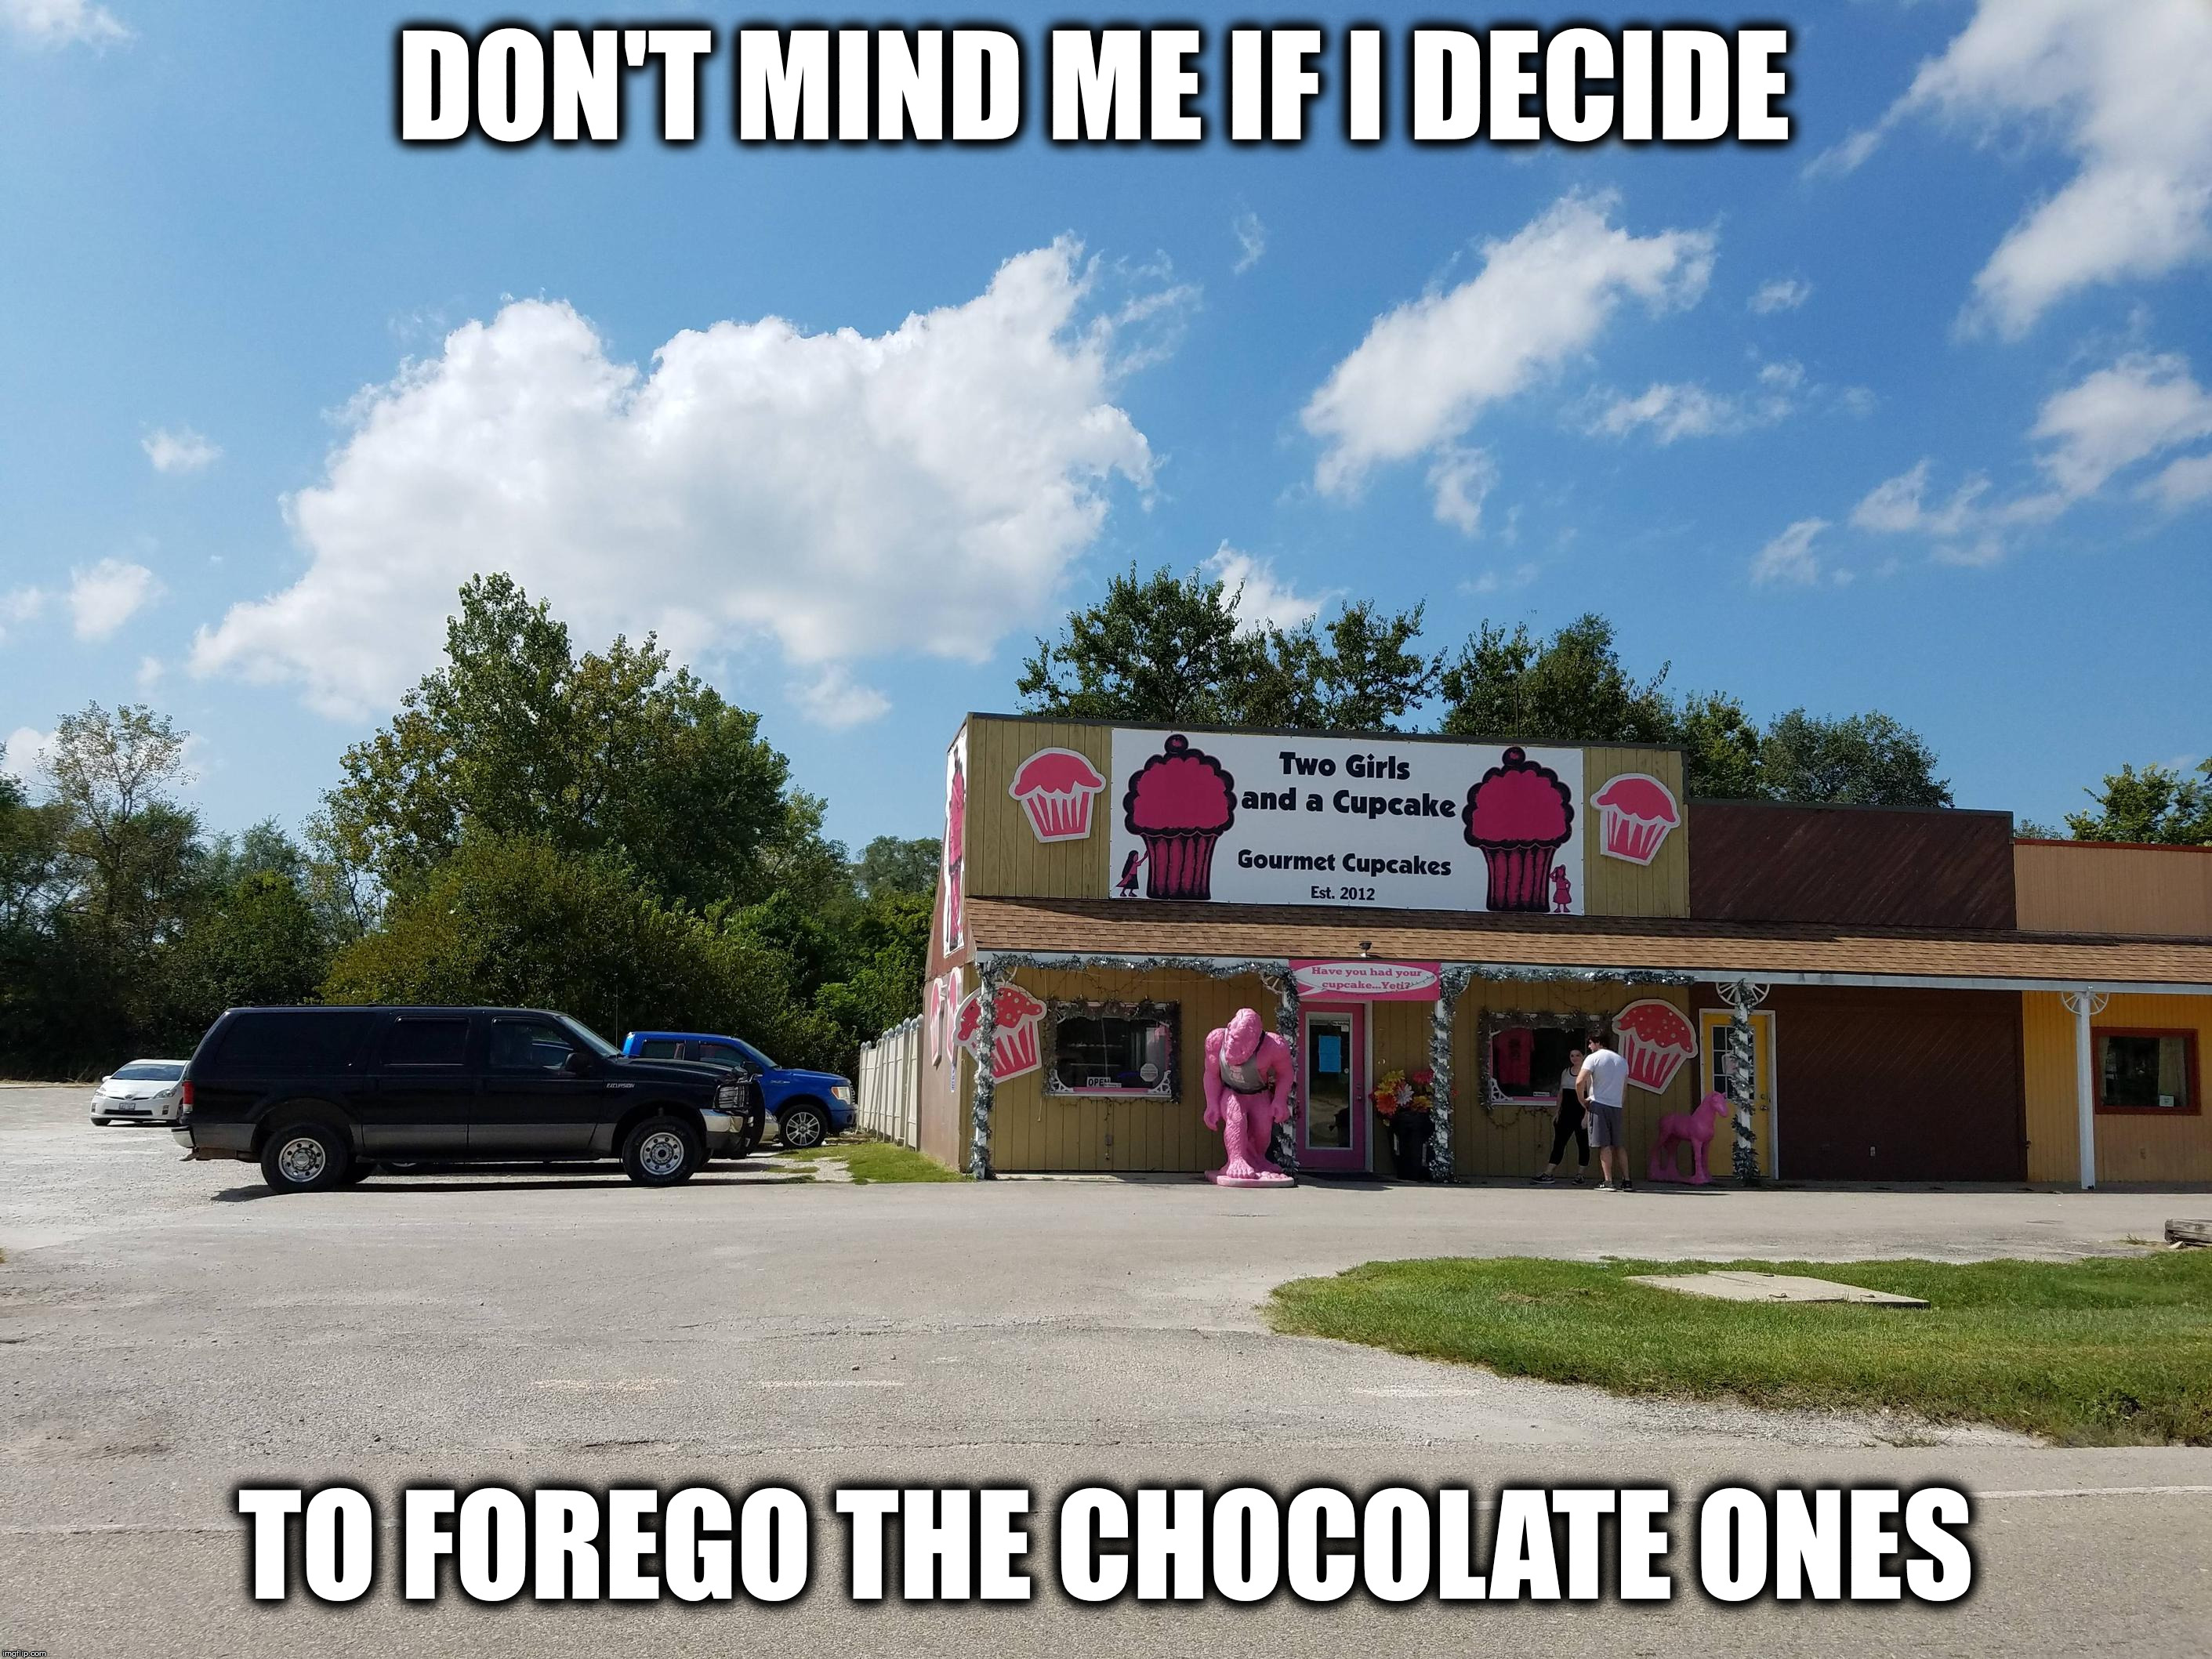 I have a sneaky feeling that it would taste like poop | DON'T MIND ME IF I DECIDE; TO FOREGO THE CHOCOLATE ONES | image tagged in two girls and a cupcake,avoid the chocolate ones | made w/ Imgflip meme maker